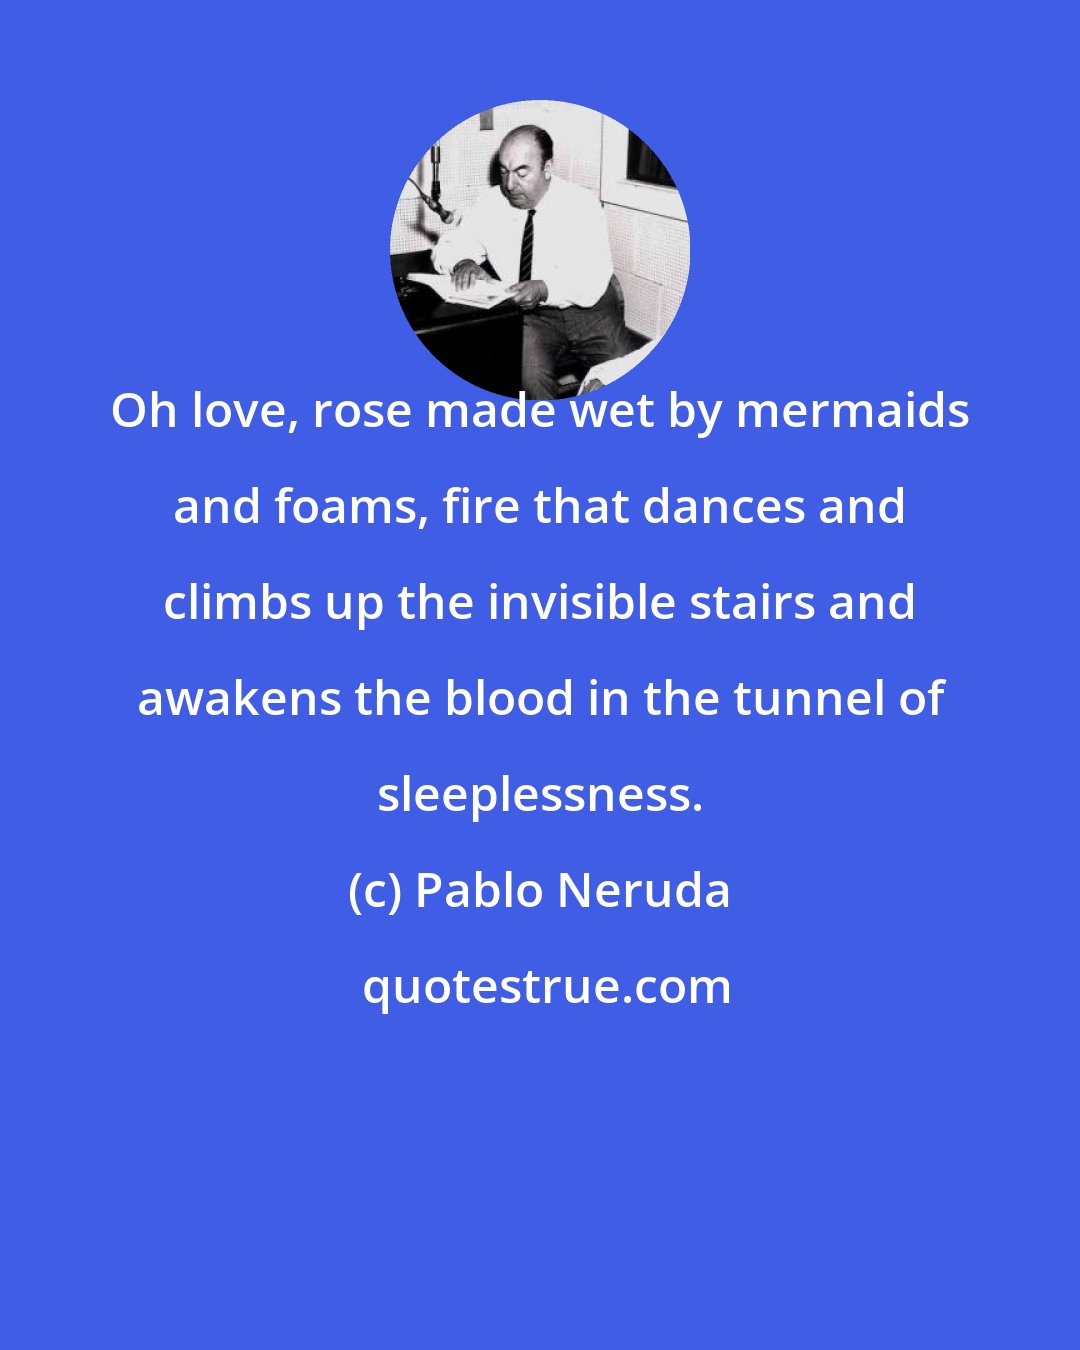 Pablo Neruda: Oh love, rose made wet by mermaids and foams, fire that dances and climbs up the invisible stairs and awakens the blood in the tunnel of sleeplessness.